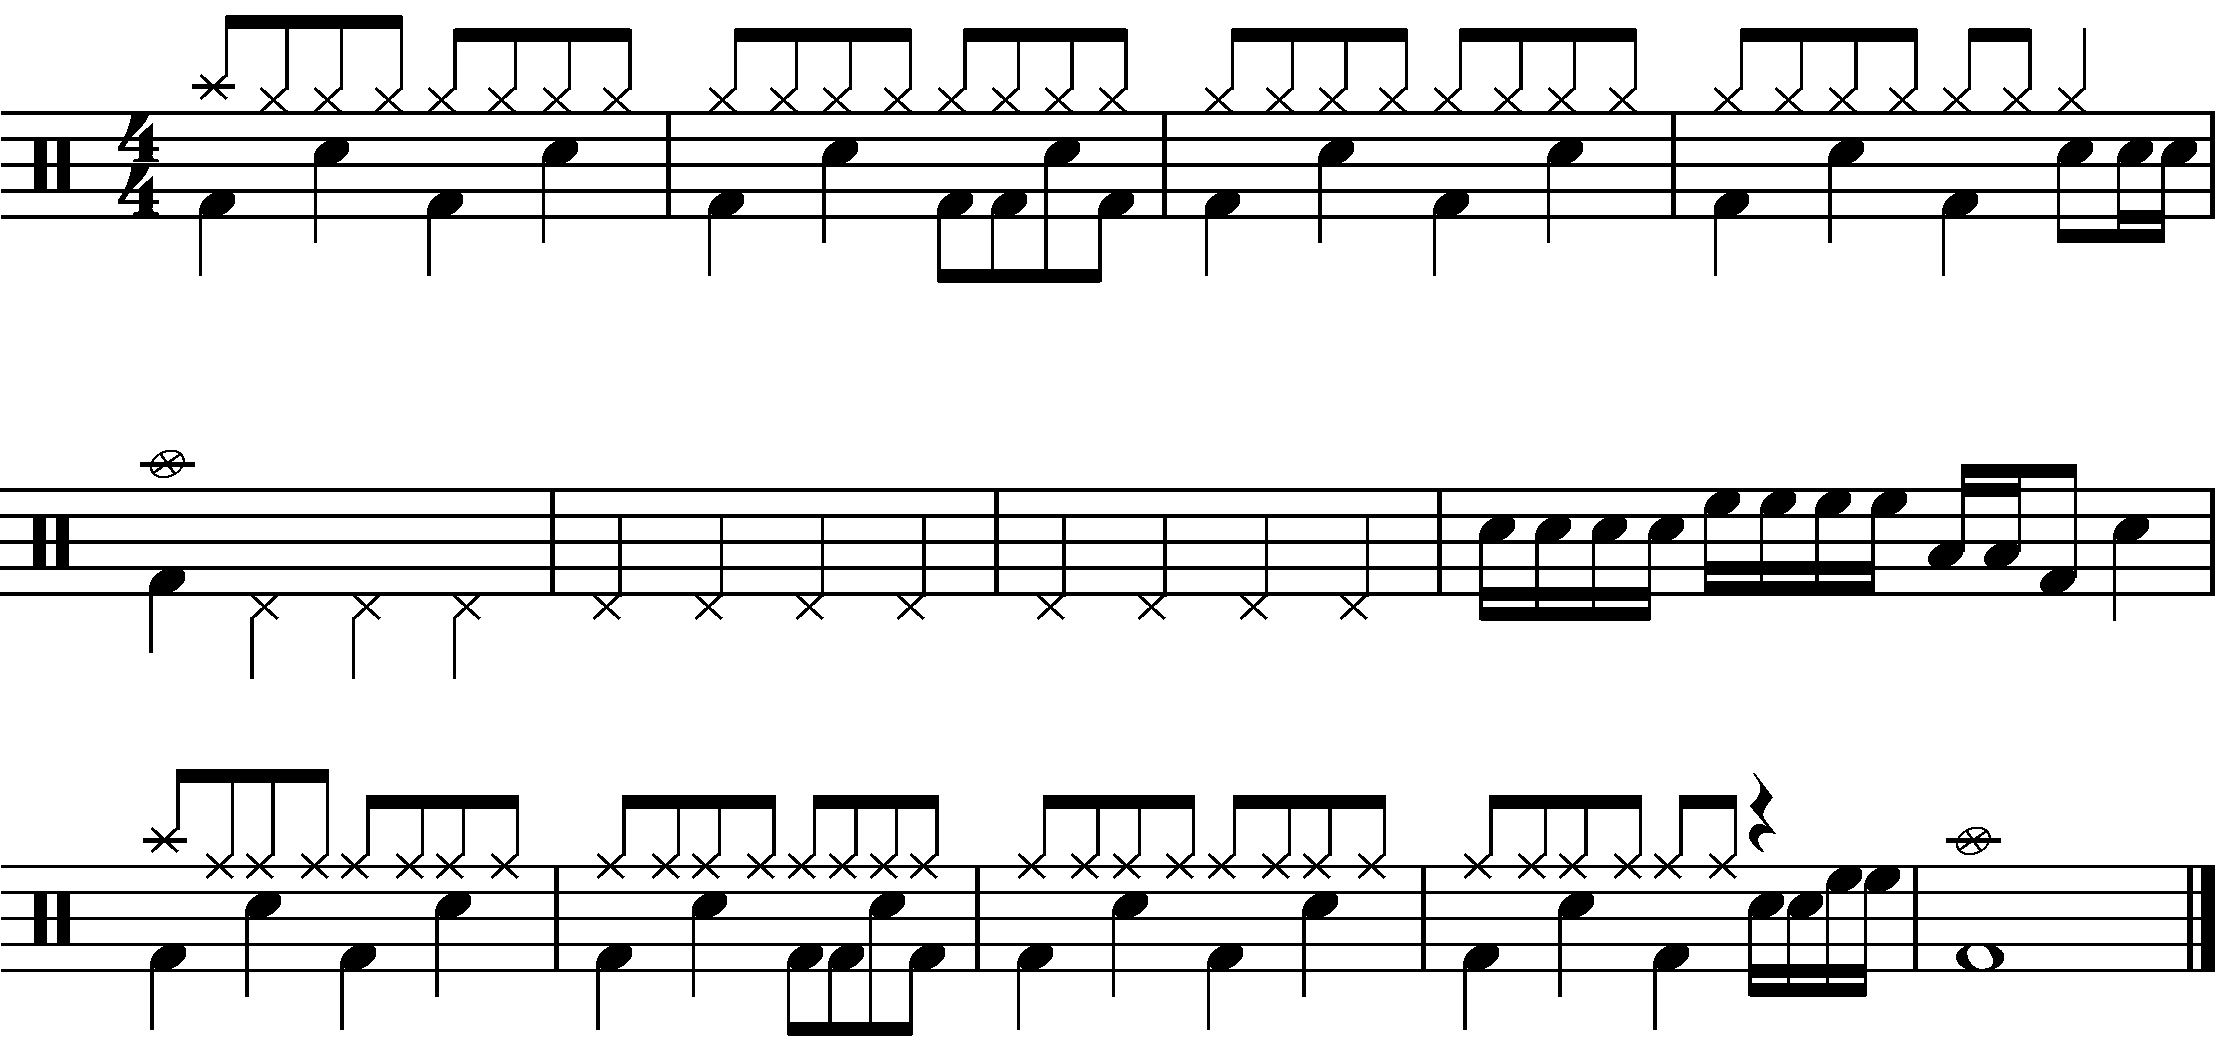 A short piece with a gap to keep time in